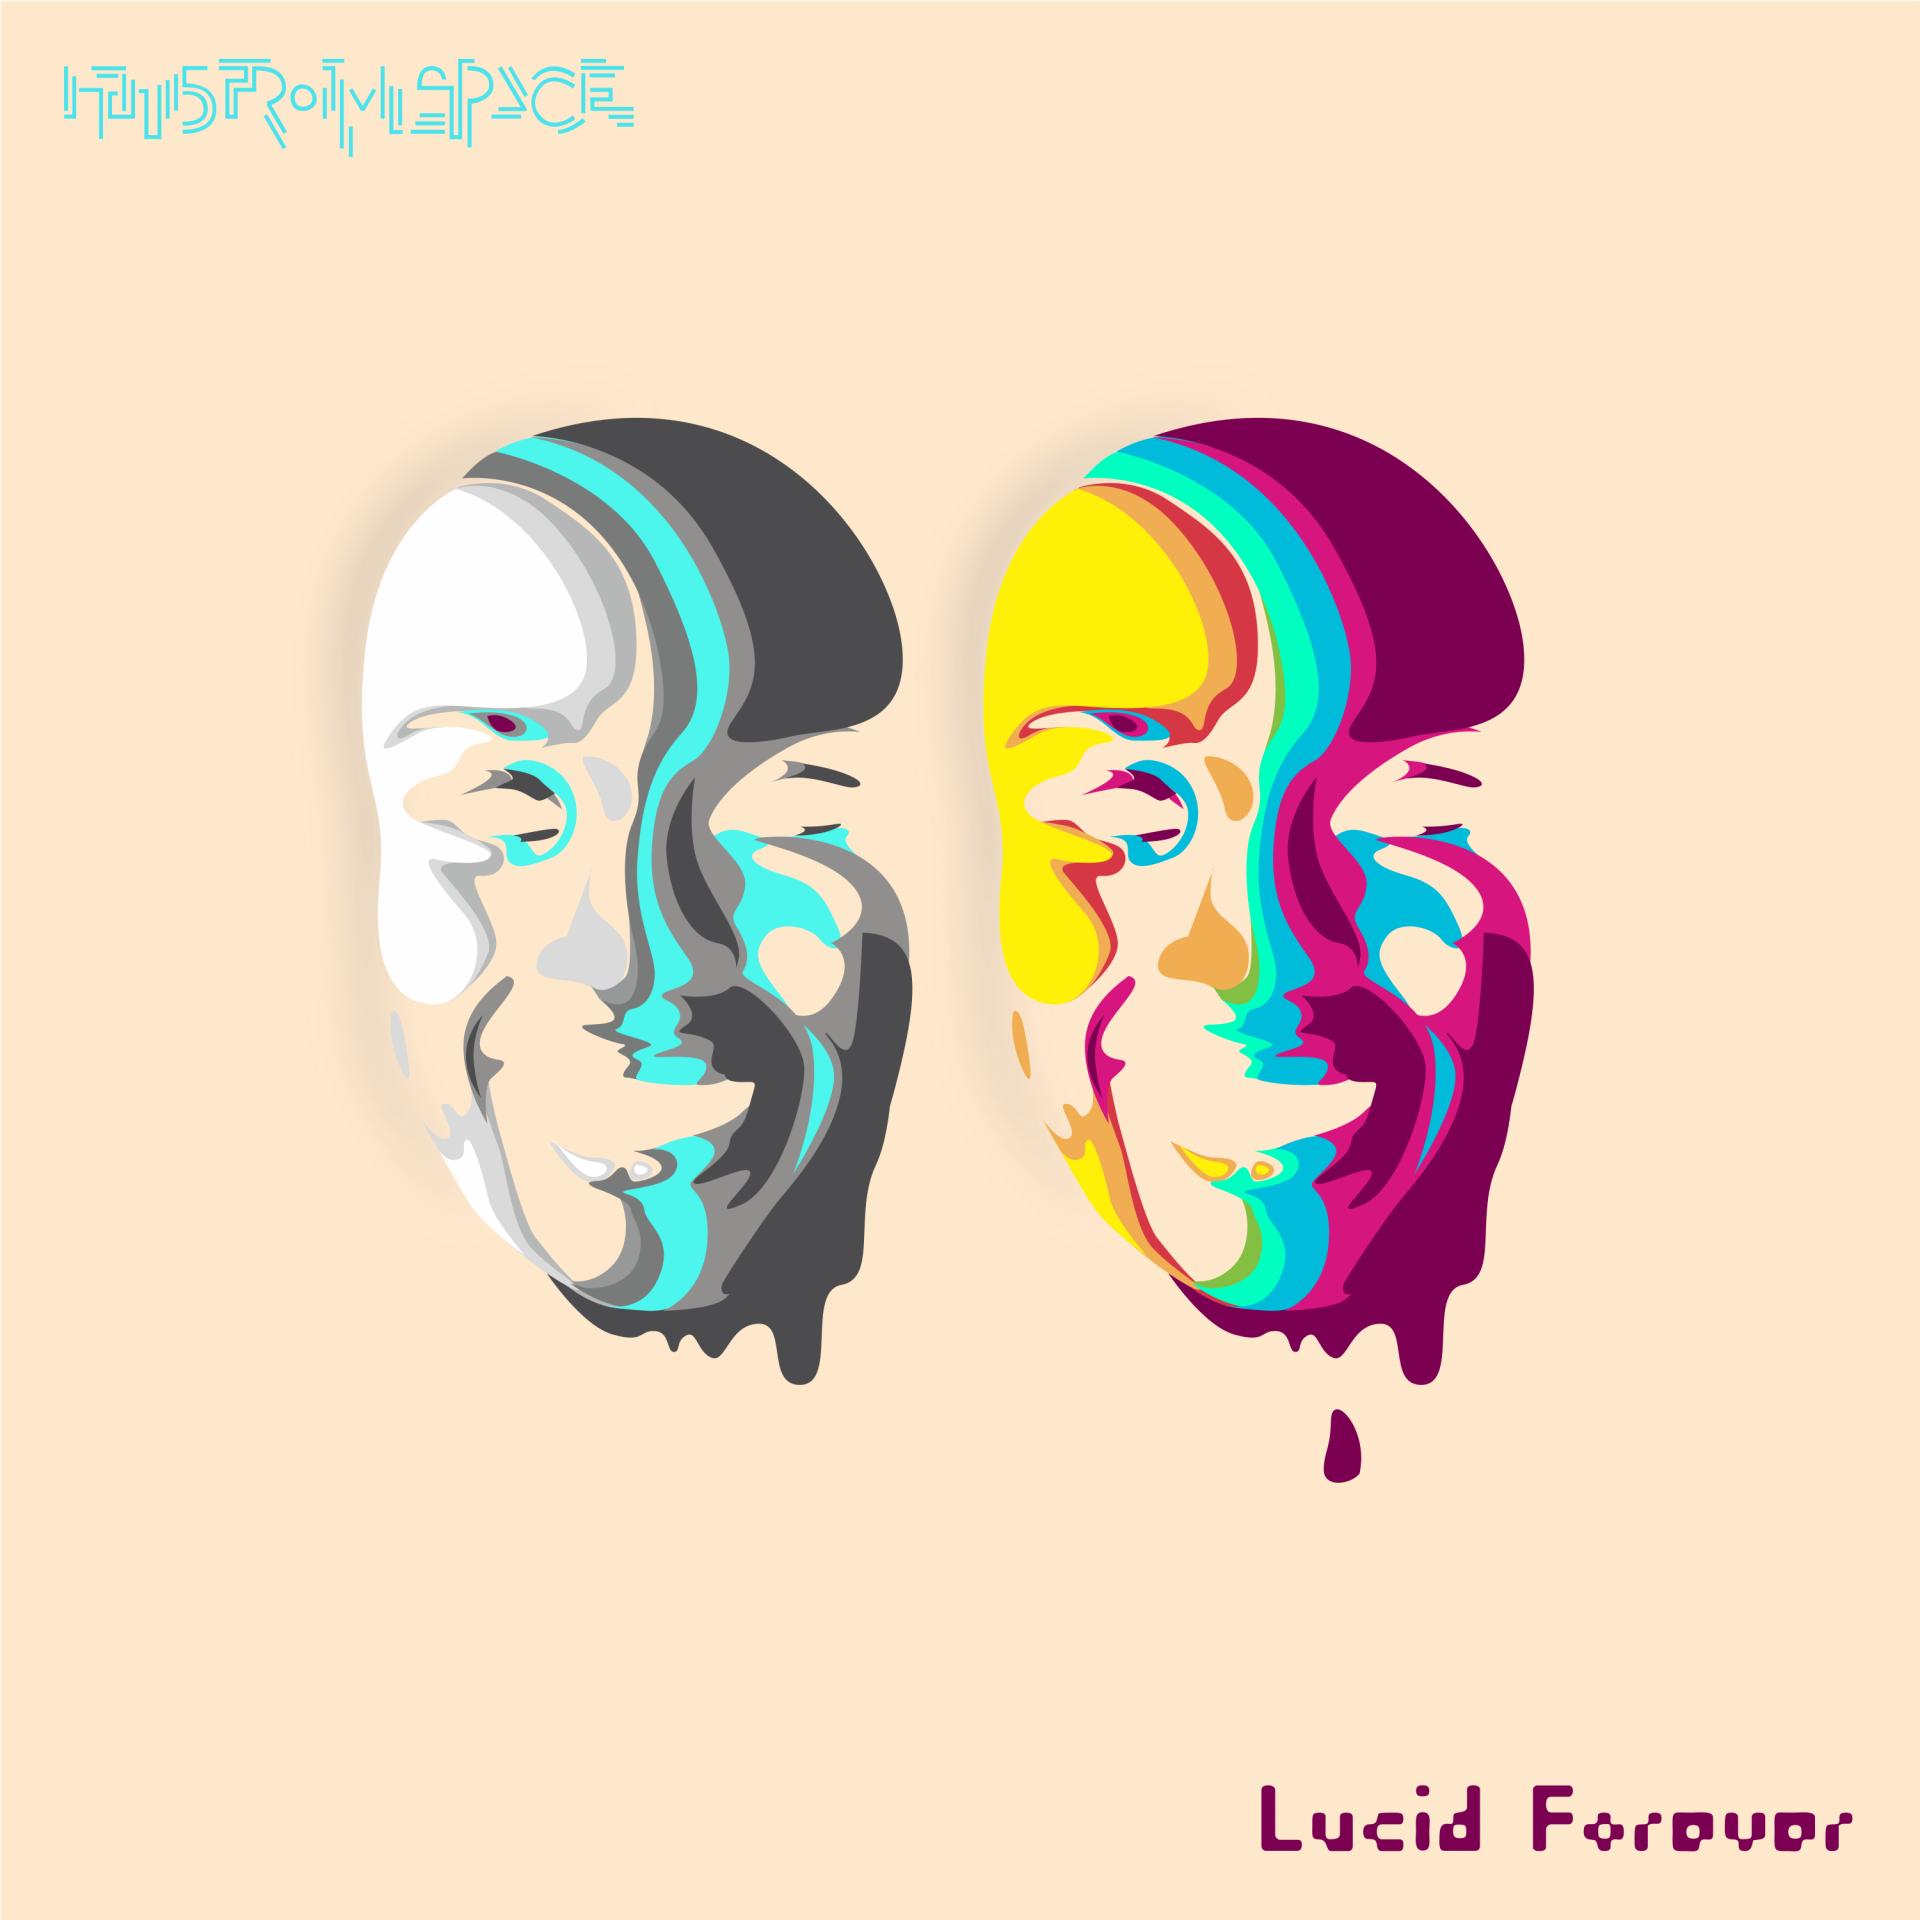 Lucid Forever Musik Album Cover von Hans From Space